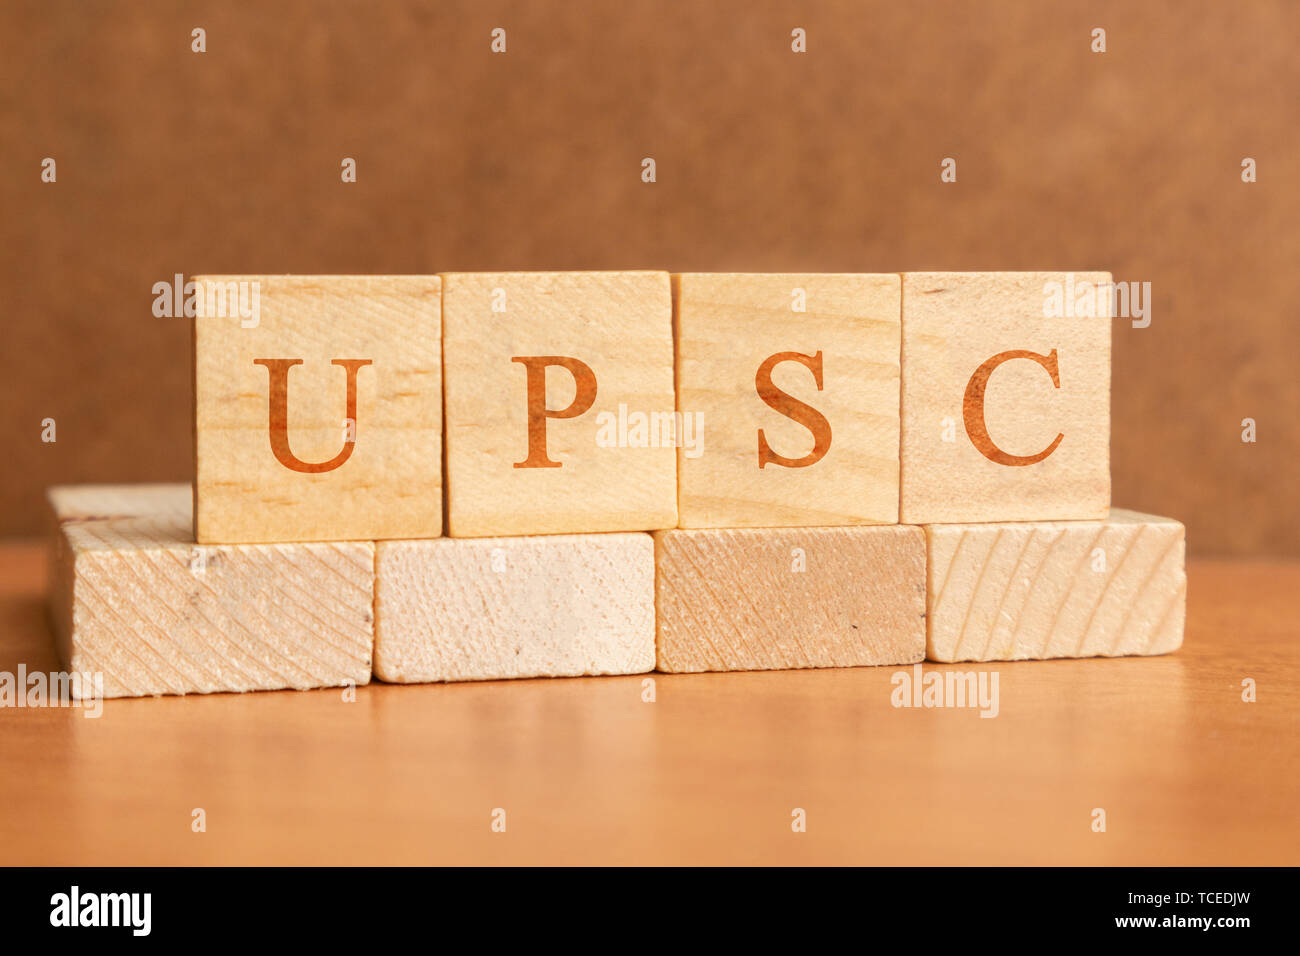 Maski, India 26,May 2019 : UPSC or Union Public Service Commission in wooden block letters. Stock Photo